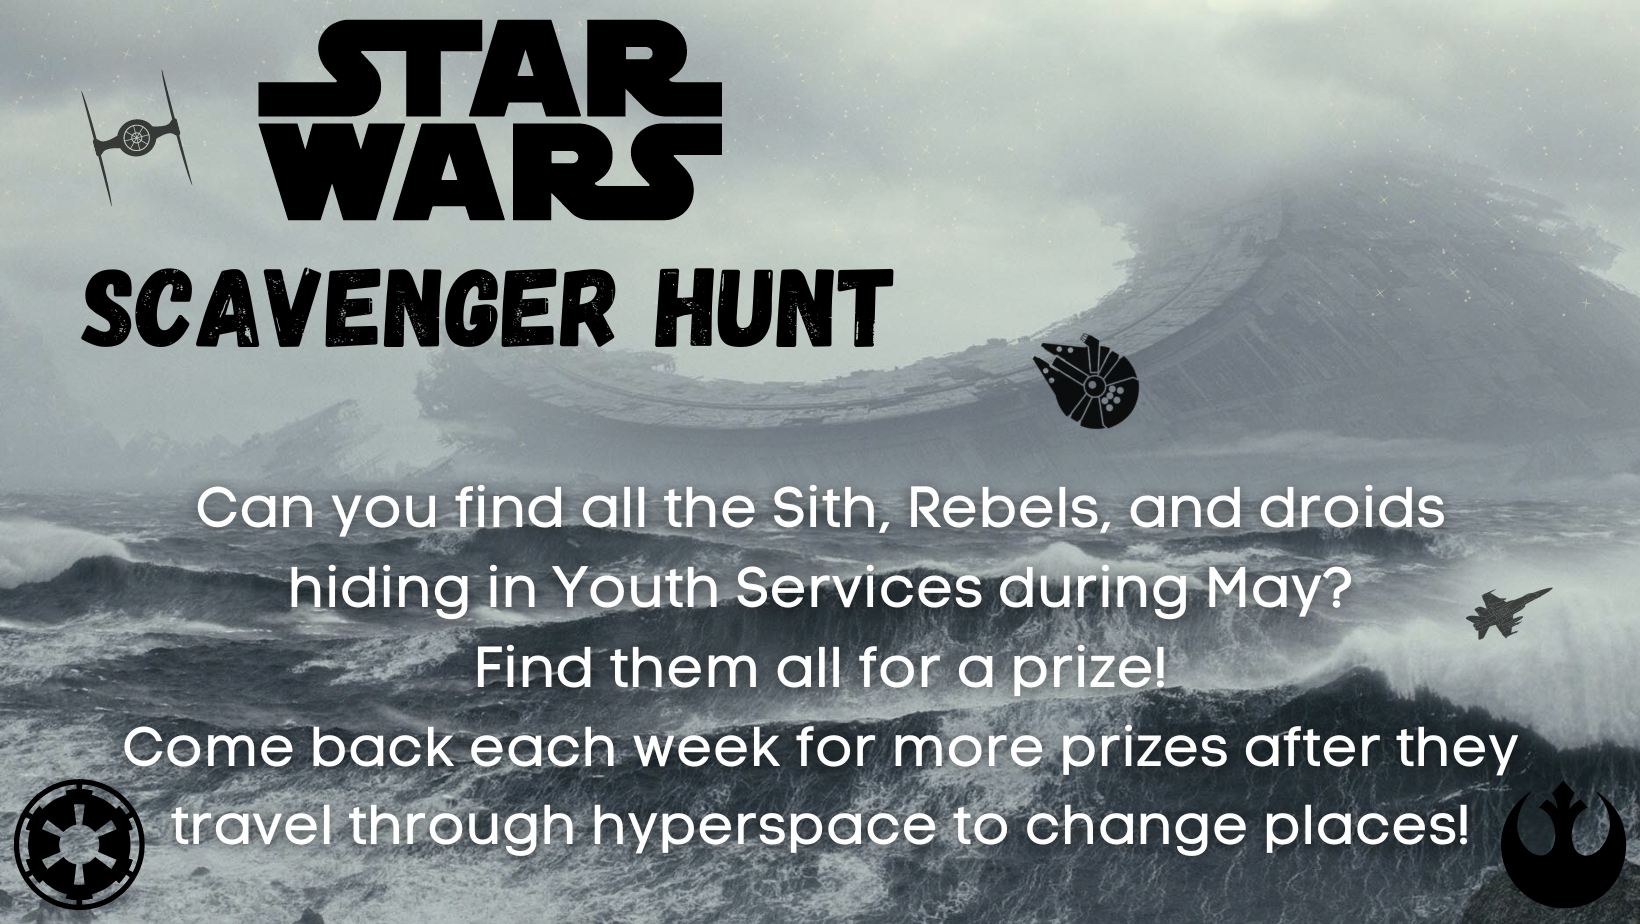 Star Wars Scavenger Hunt, throughout May in Youth Services